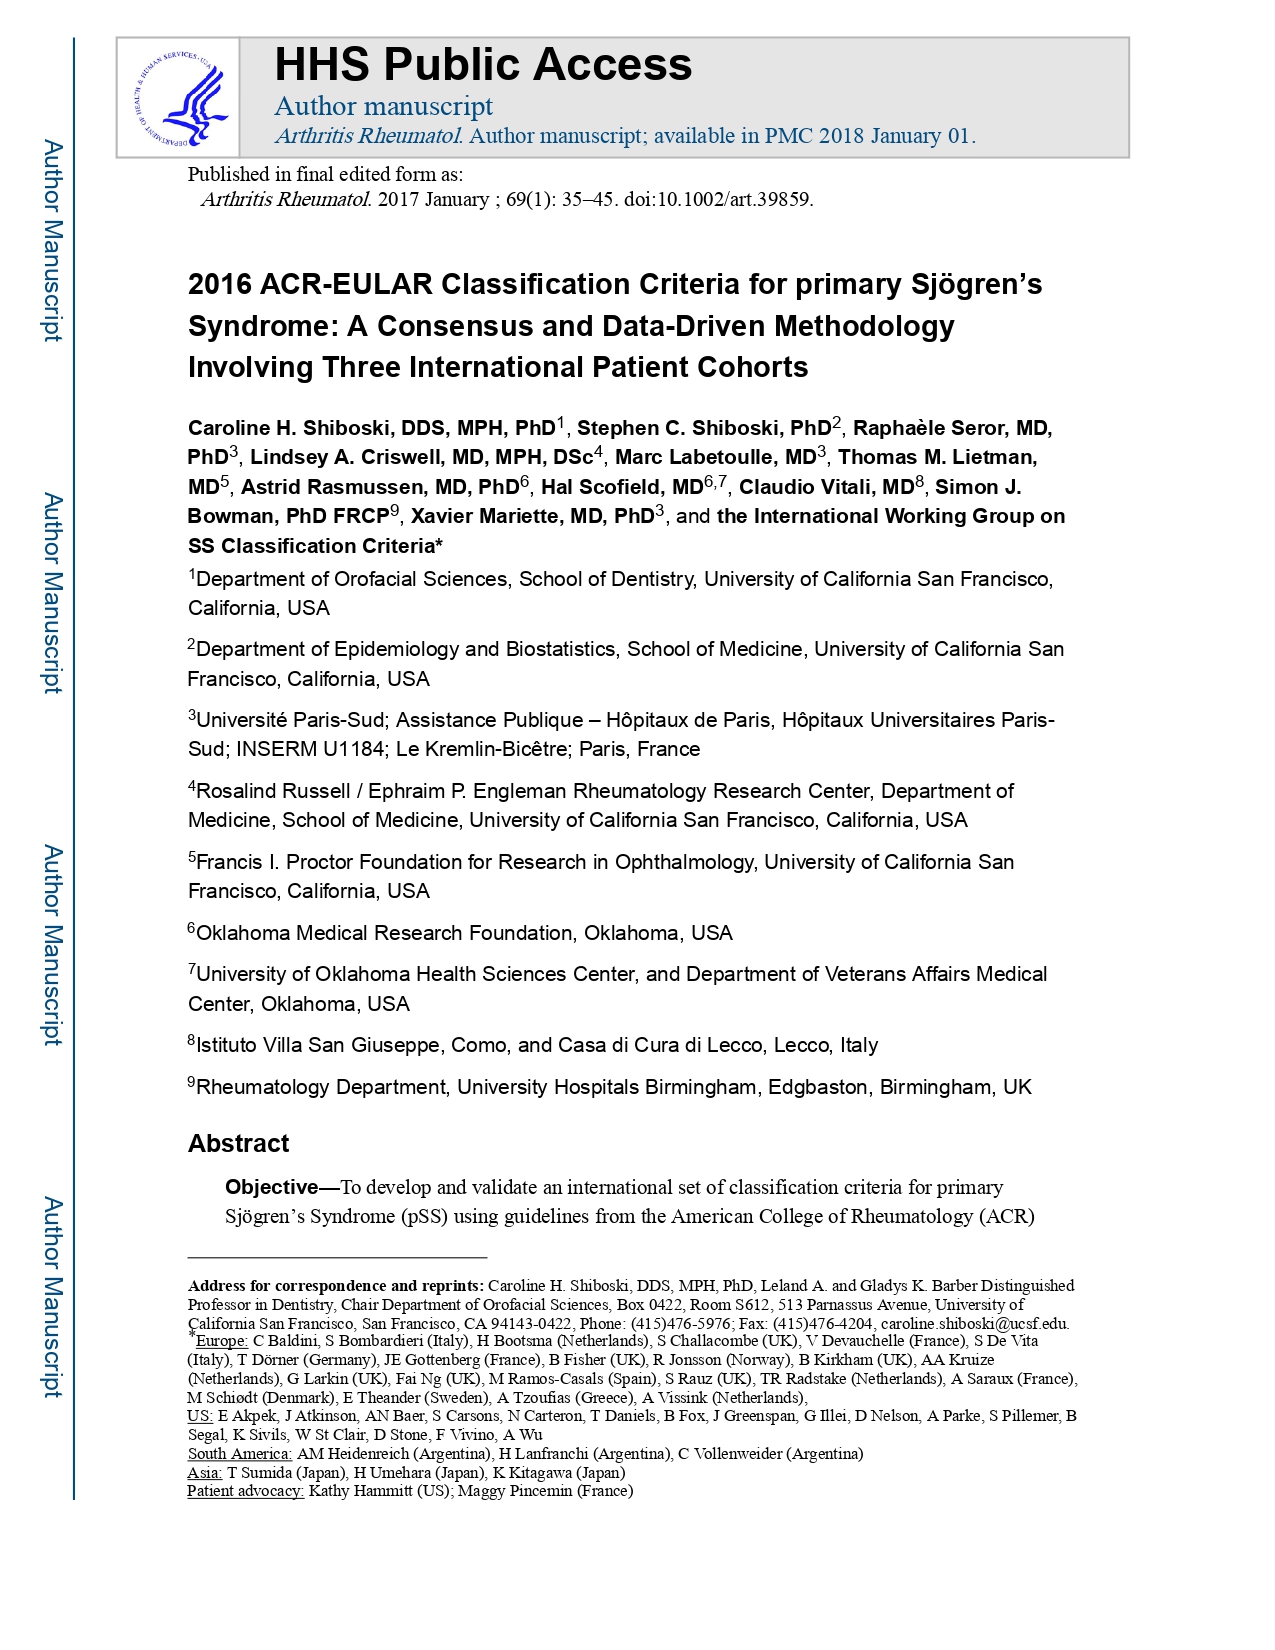 2016 American College of Rheumatology/European League Against Rheumatism classification criteria for primary Sjögren's syndrome (ACR 2016)